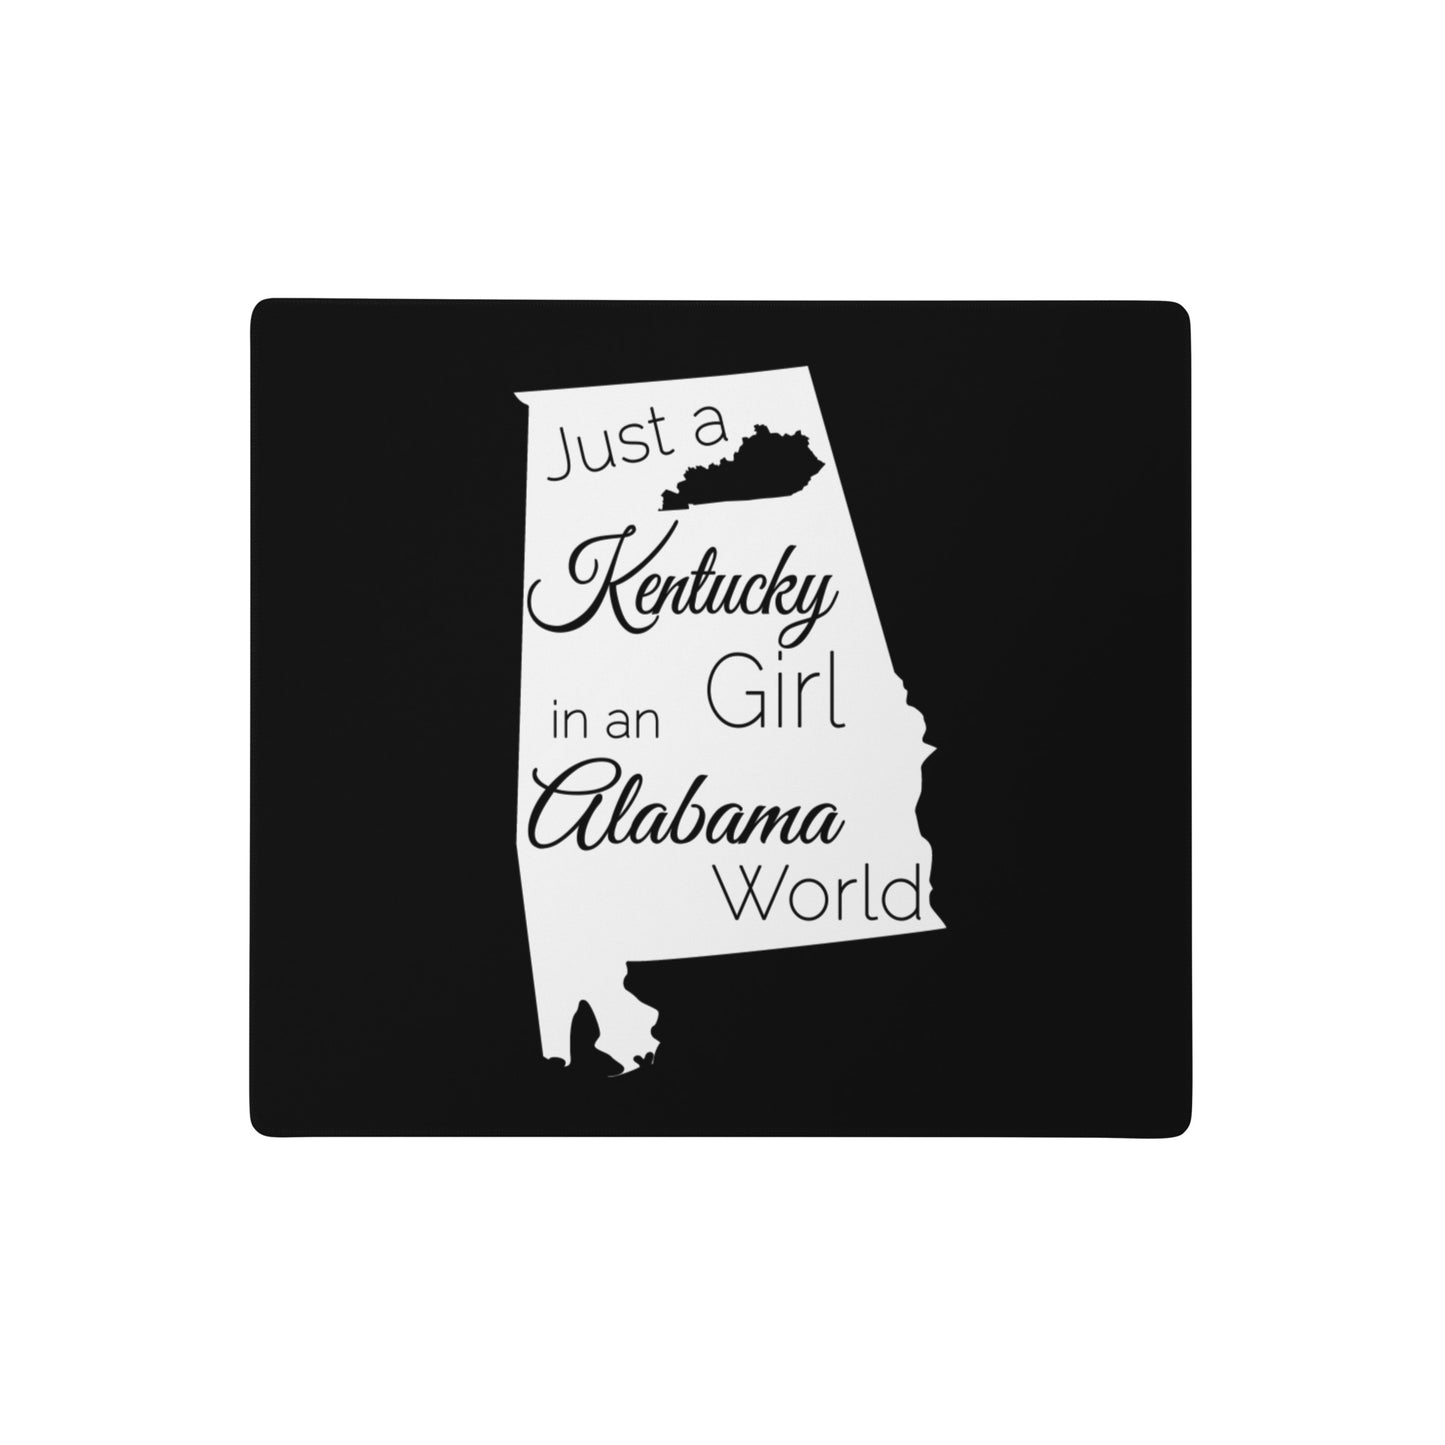 Just a Kentucky Girl in an Alabama World Gaming mouse pad